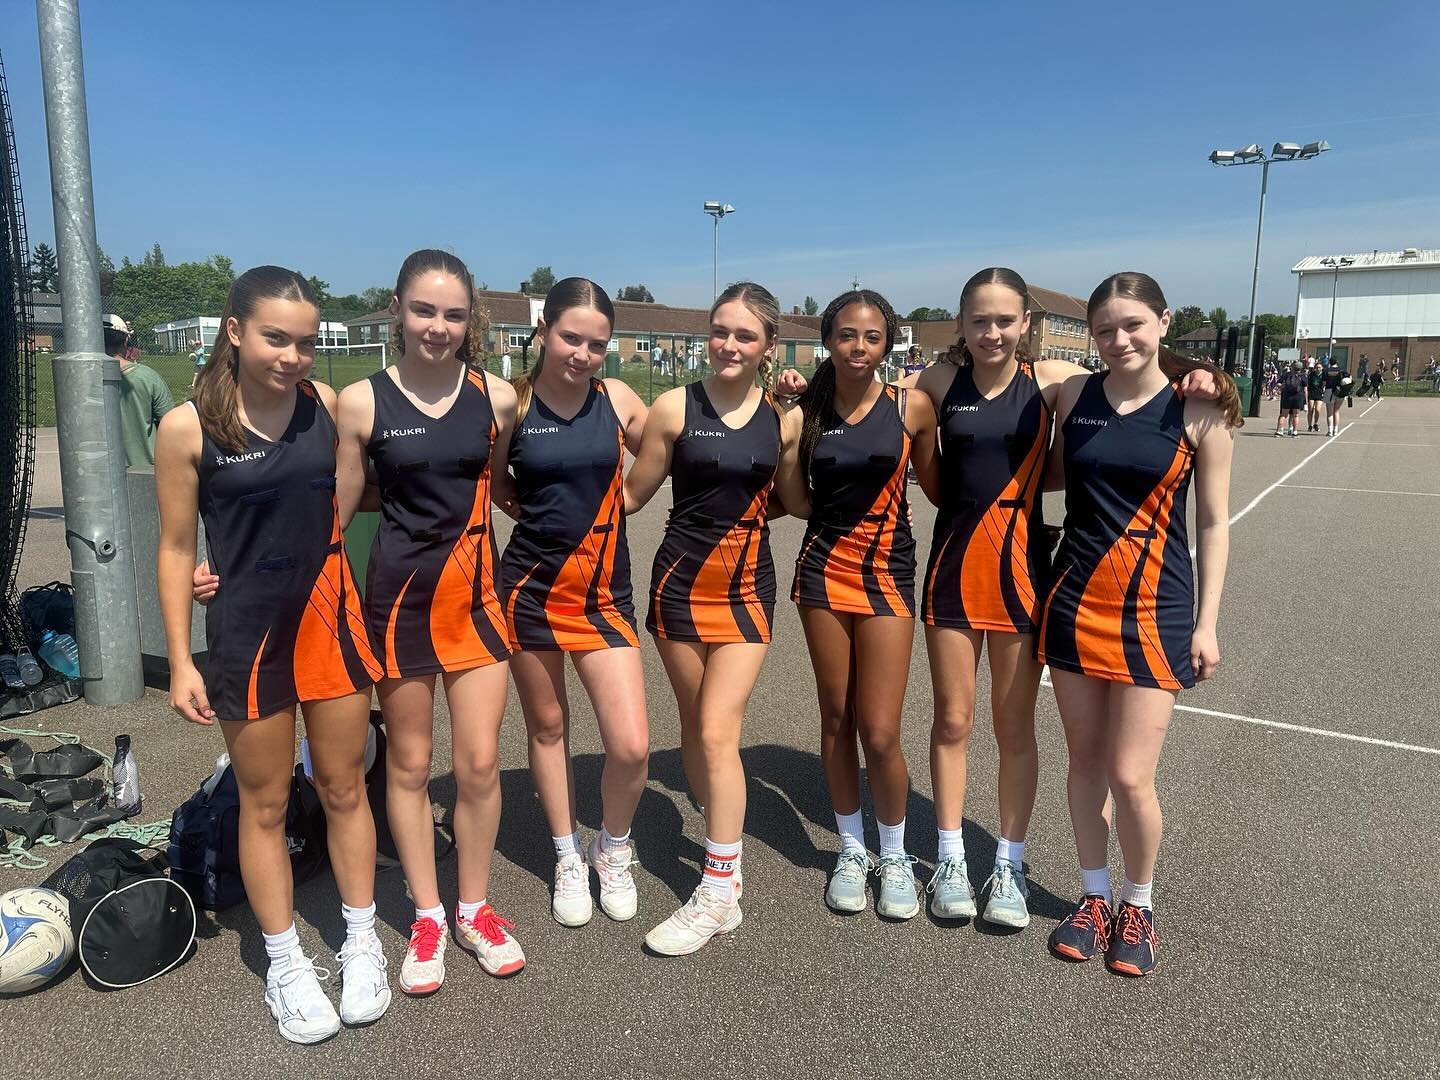 A very hot game today for the U13s&hellip;. With no subs 🙈 unfortunately with no extra legs to help out the heat took its toll on them. Some good play - just need to work on that ball placement and movement. A great game though against a nice u14 te